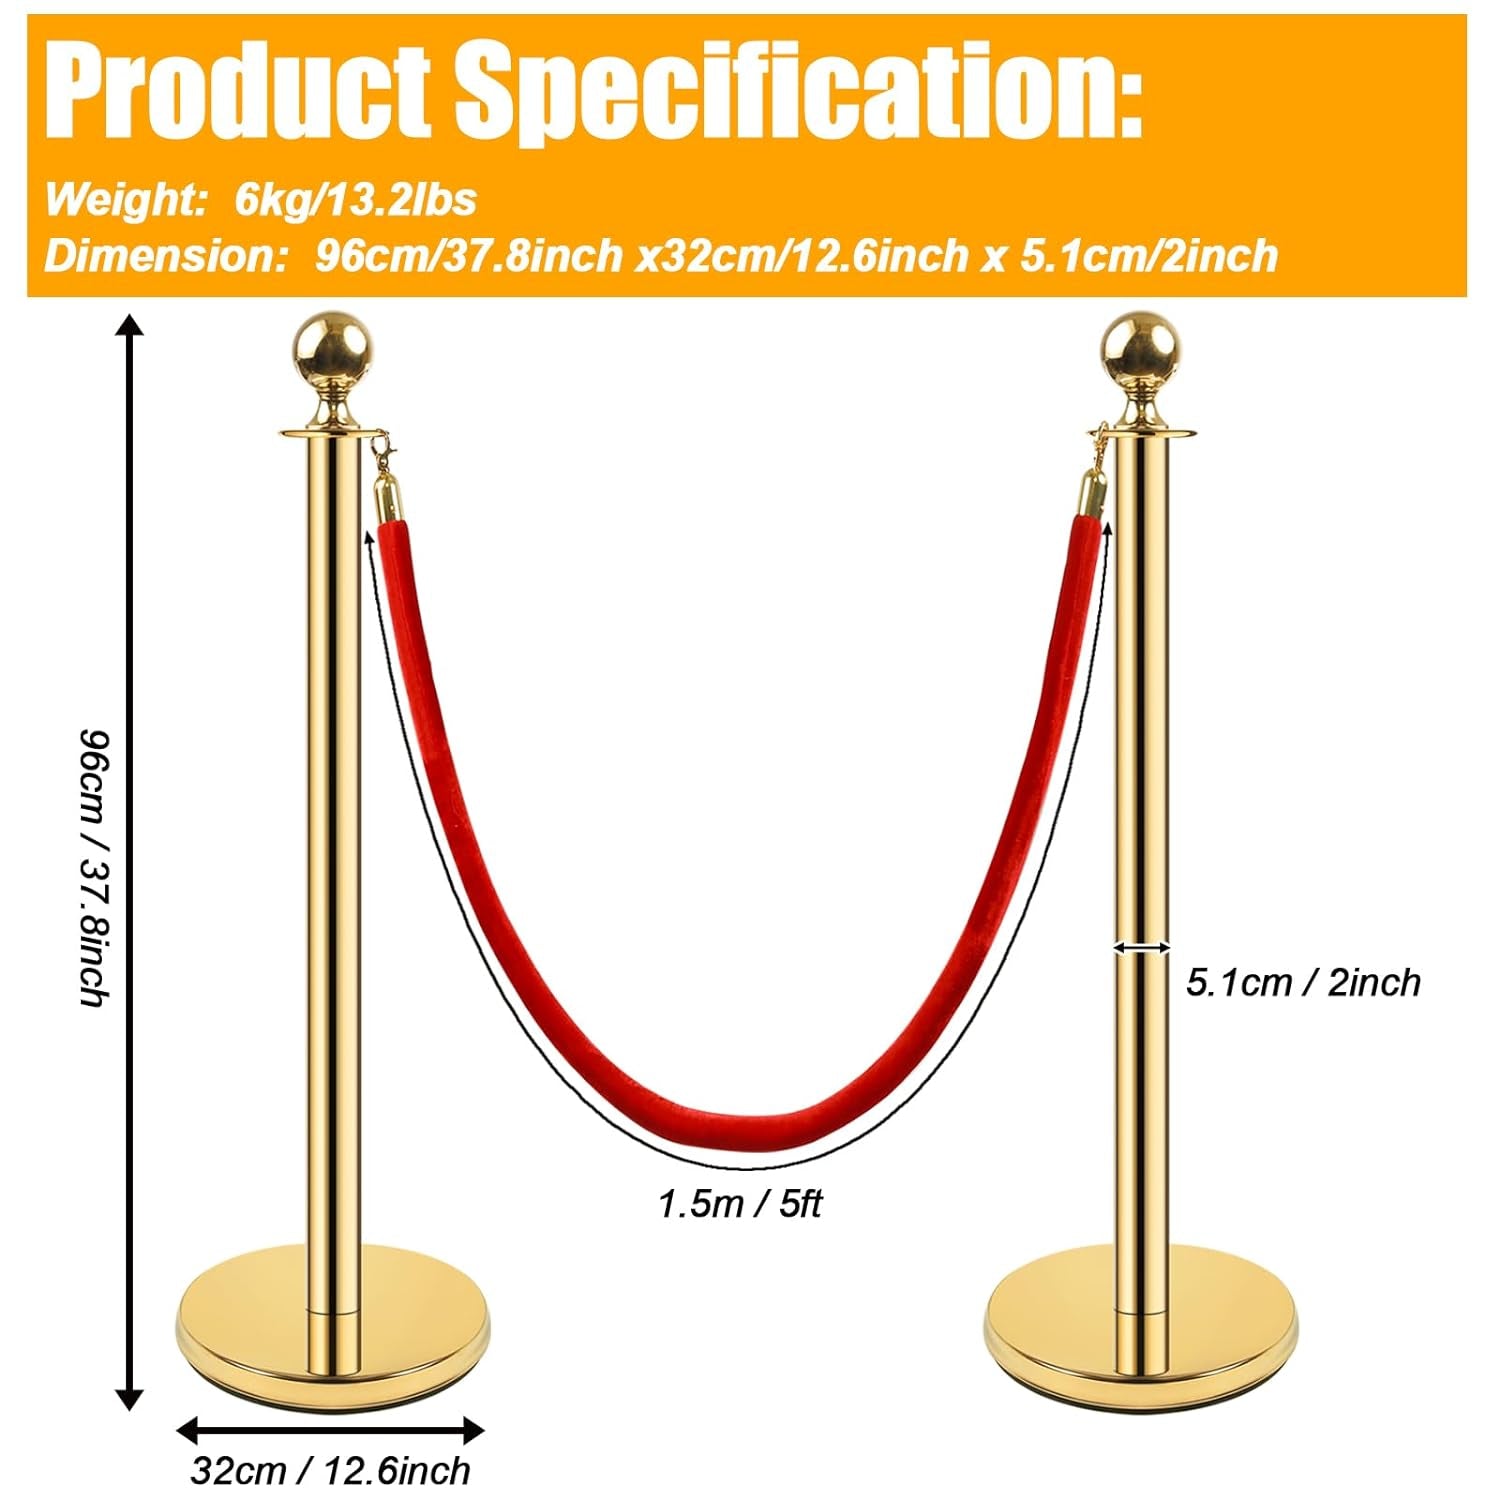 Gold Stanchion Post,38 Inch Stanchion Posts Queue with 5 Ft/1.5 M Red Velvet Rope,Hollow Base and Ropes Safety Barriers Set,Crowd Control Barriers Queue Line Rope for Theater Party